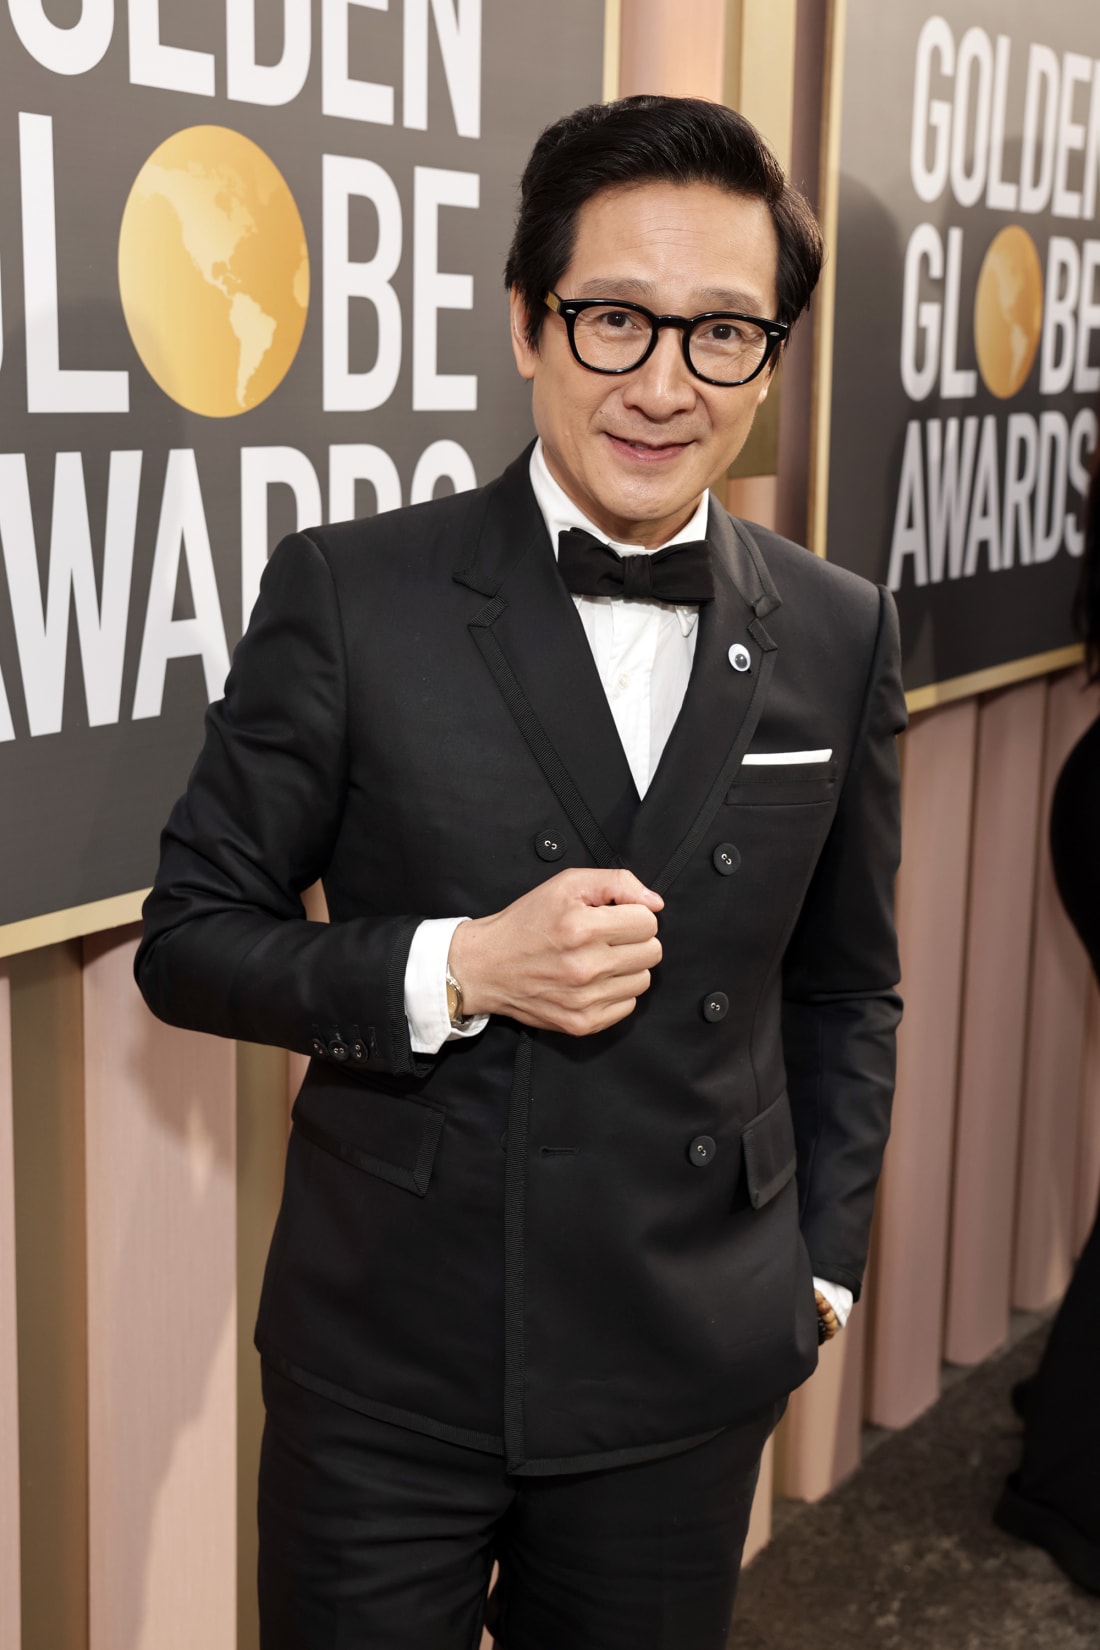 Ke Huy Quan, who went on to be named Best Supporting Actor, attached a stick-on googly eye to his lapel.